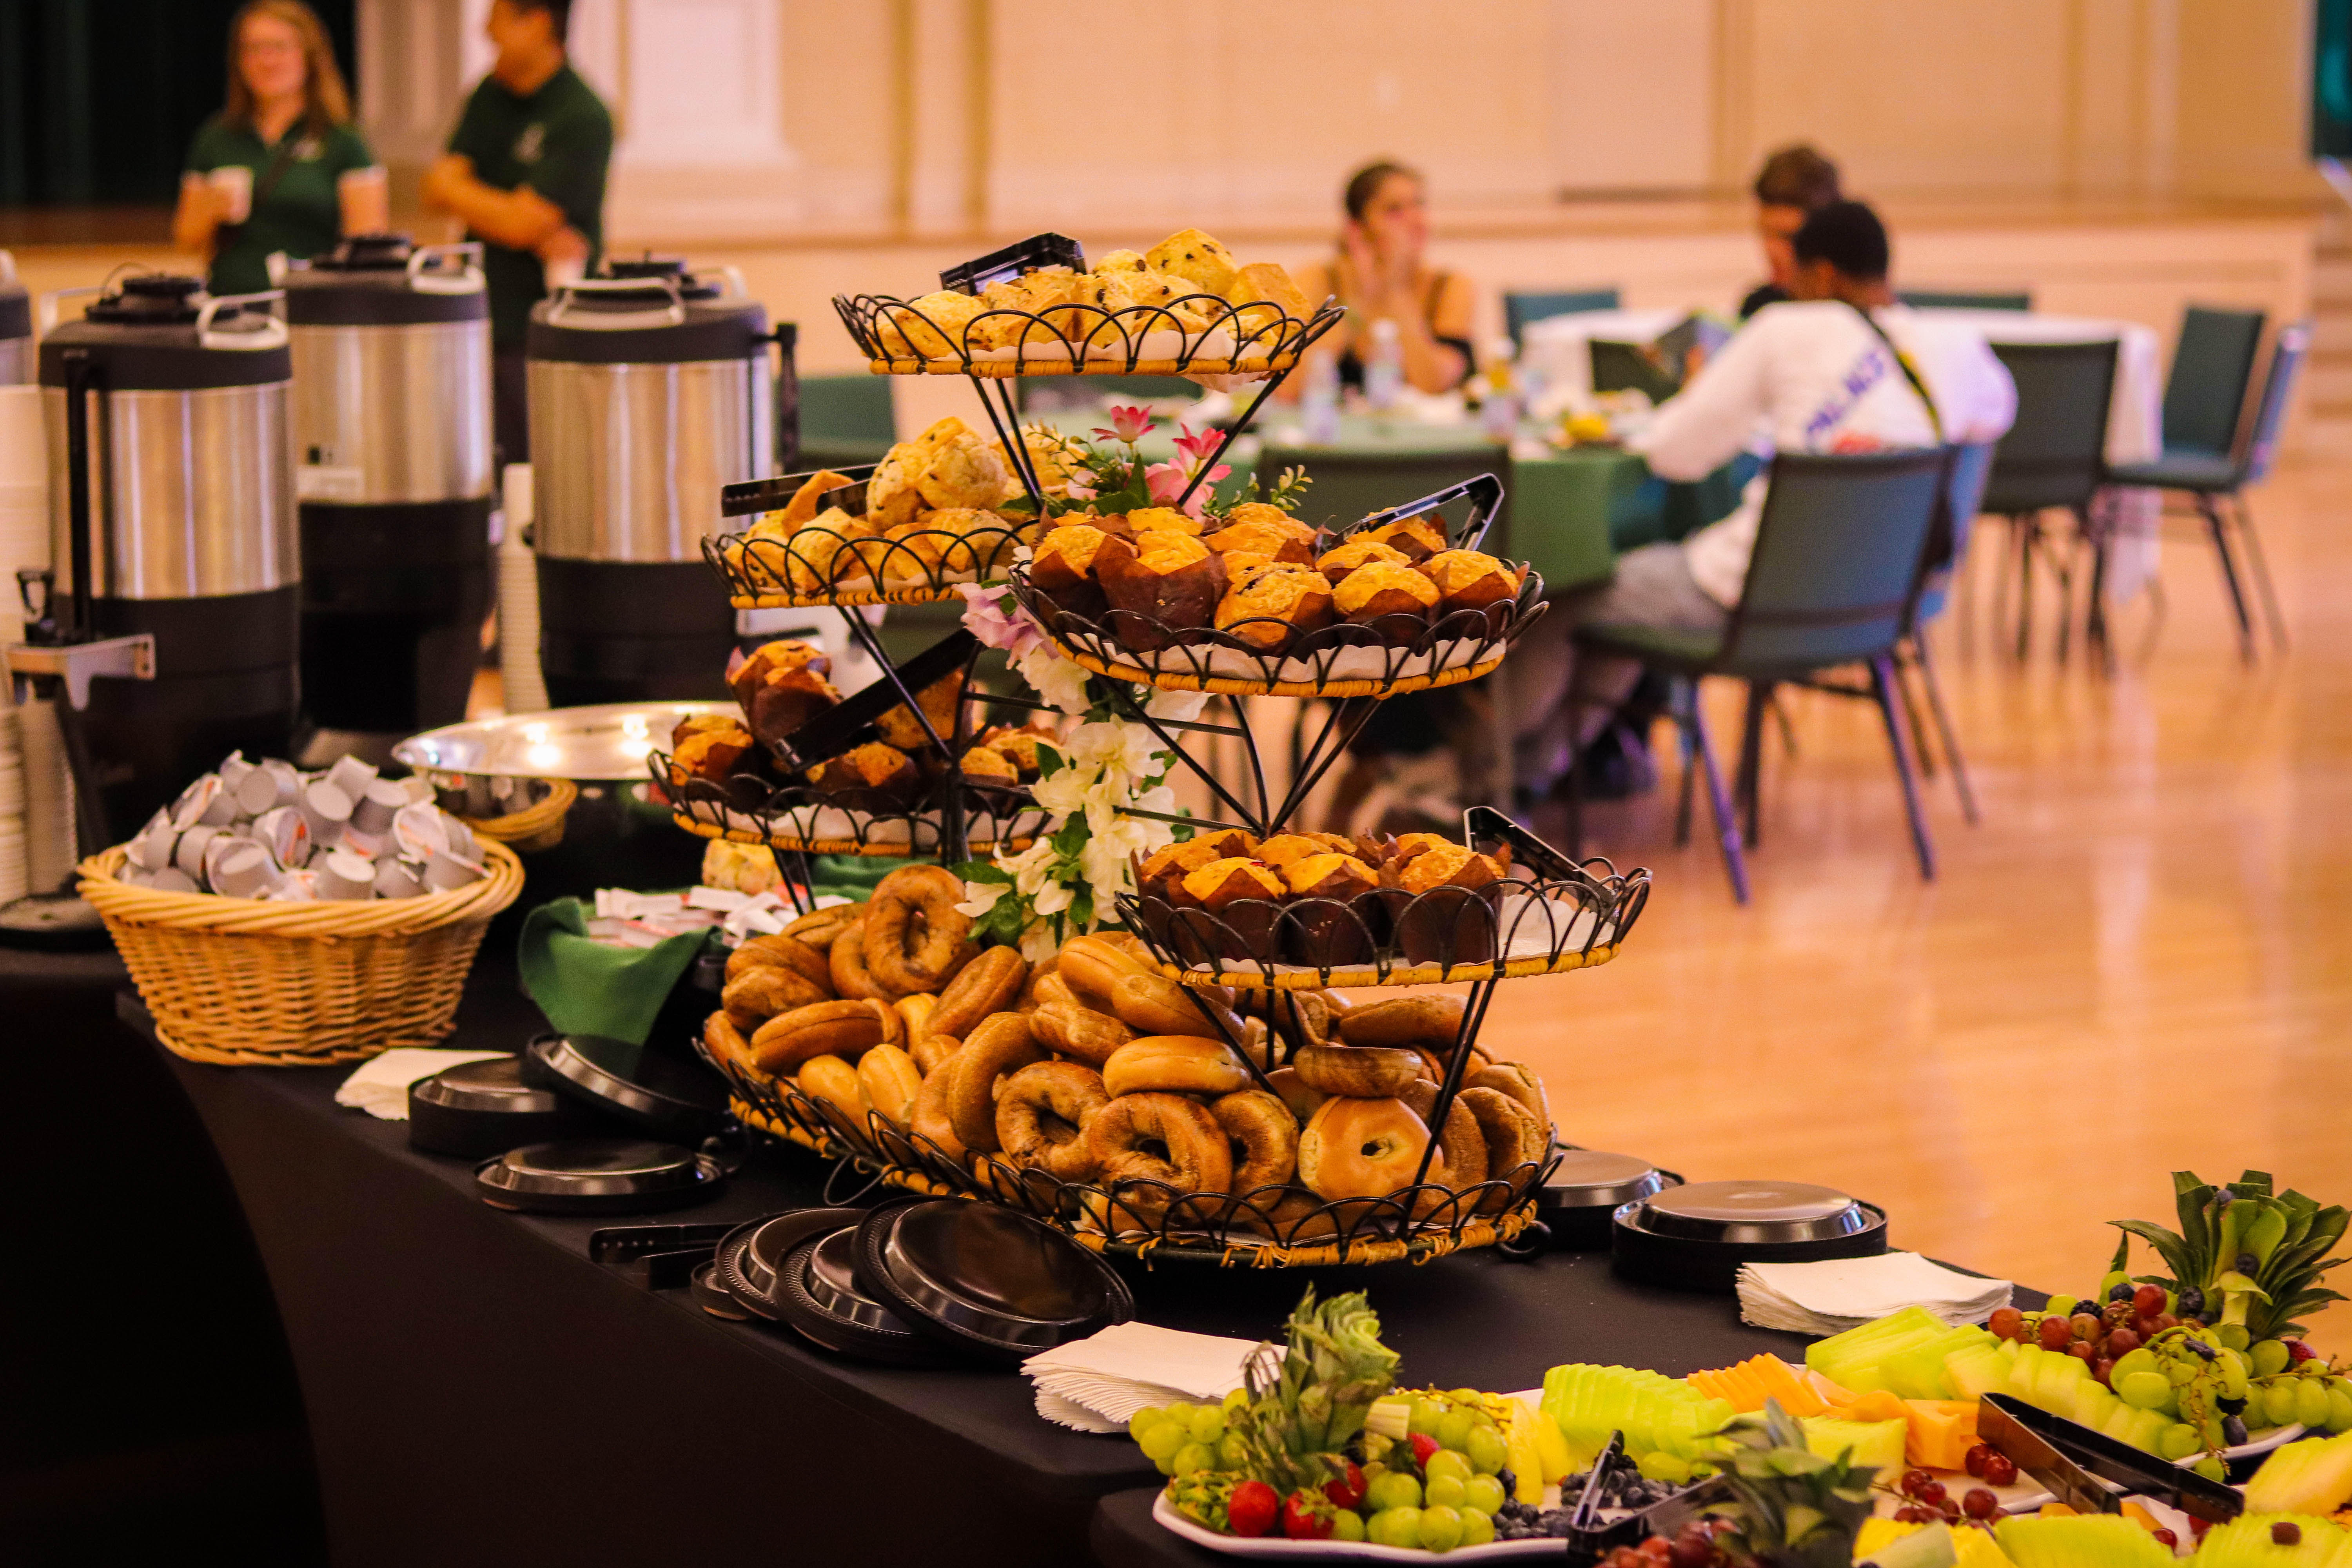 Photo of pastries on table with students in background